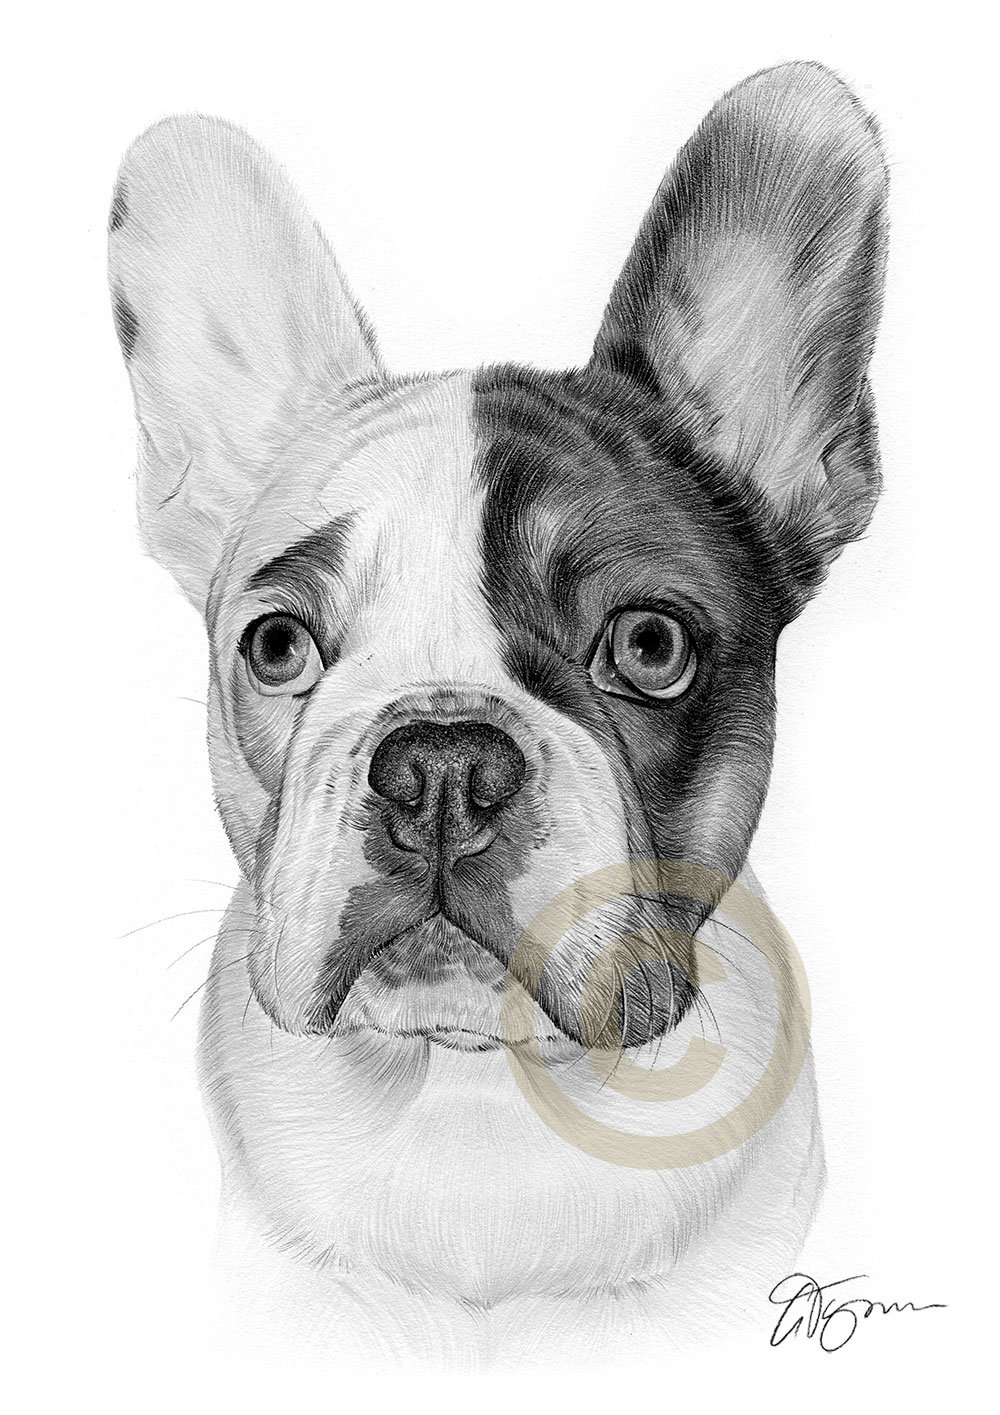 Pet portrait commission of a french bulldog by artist Gary Tymon